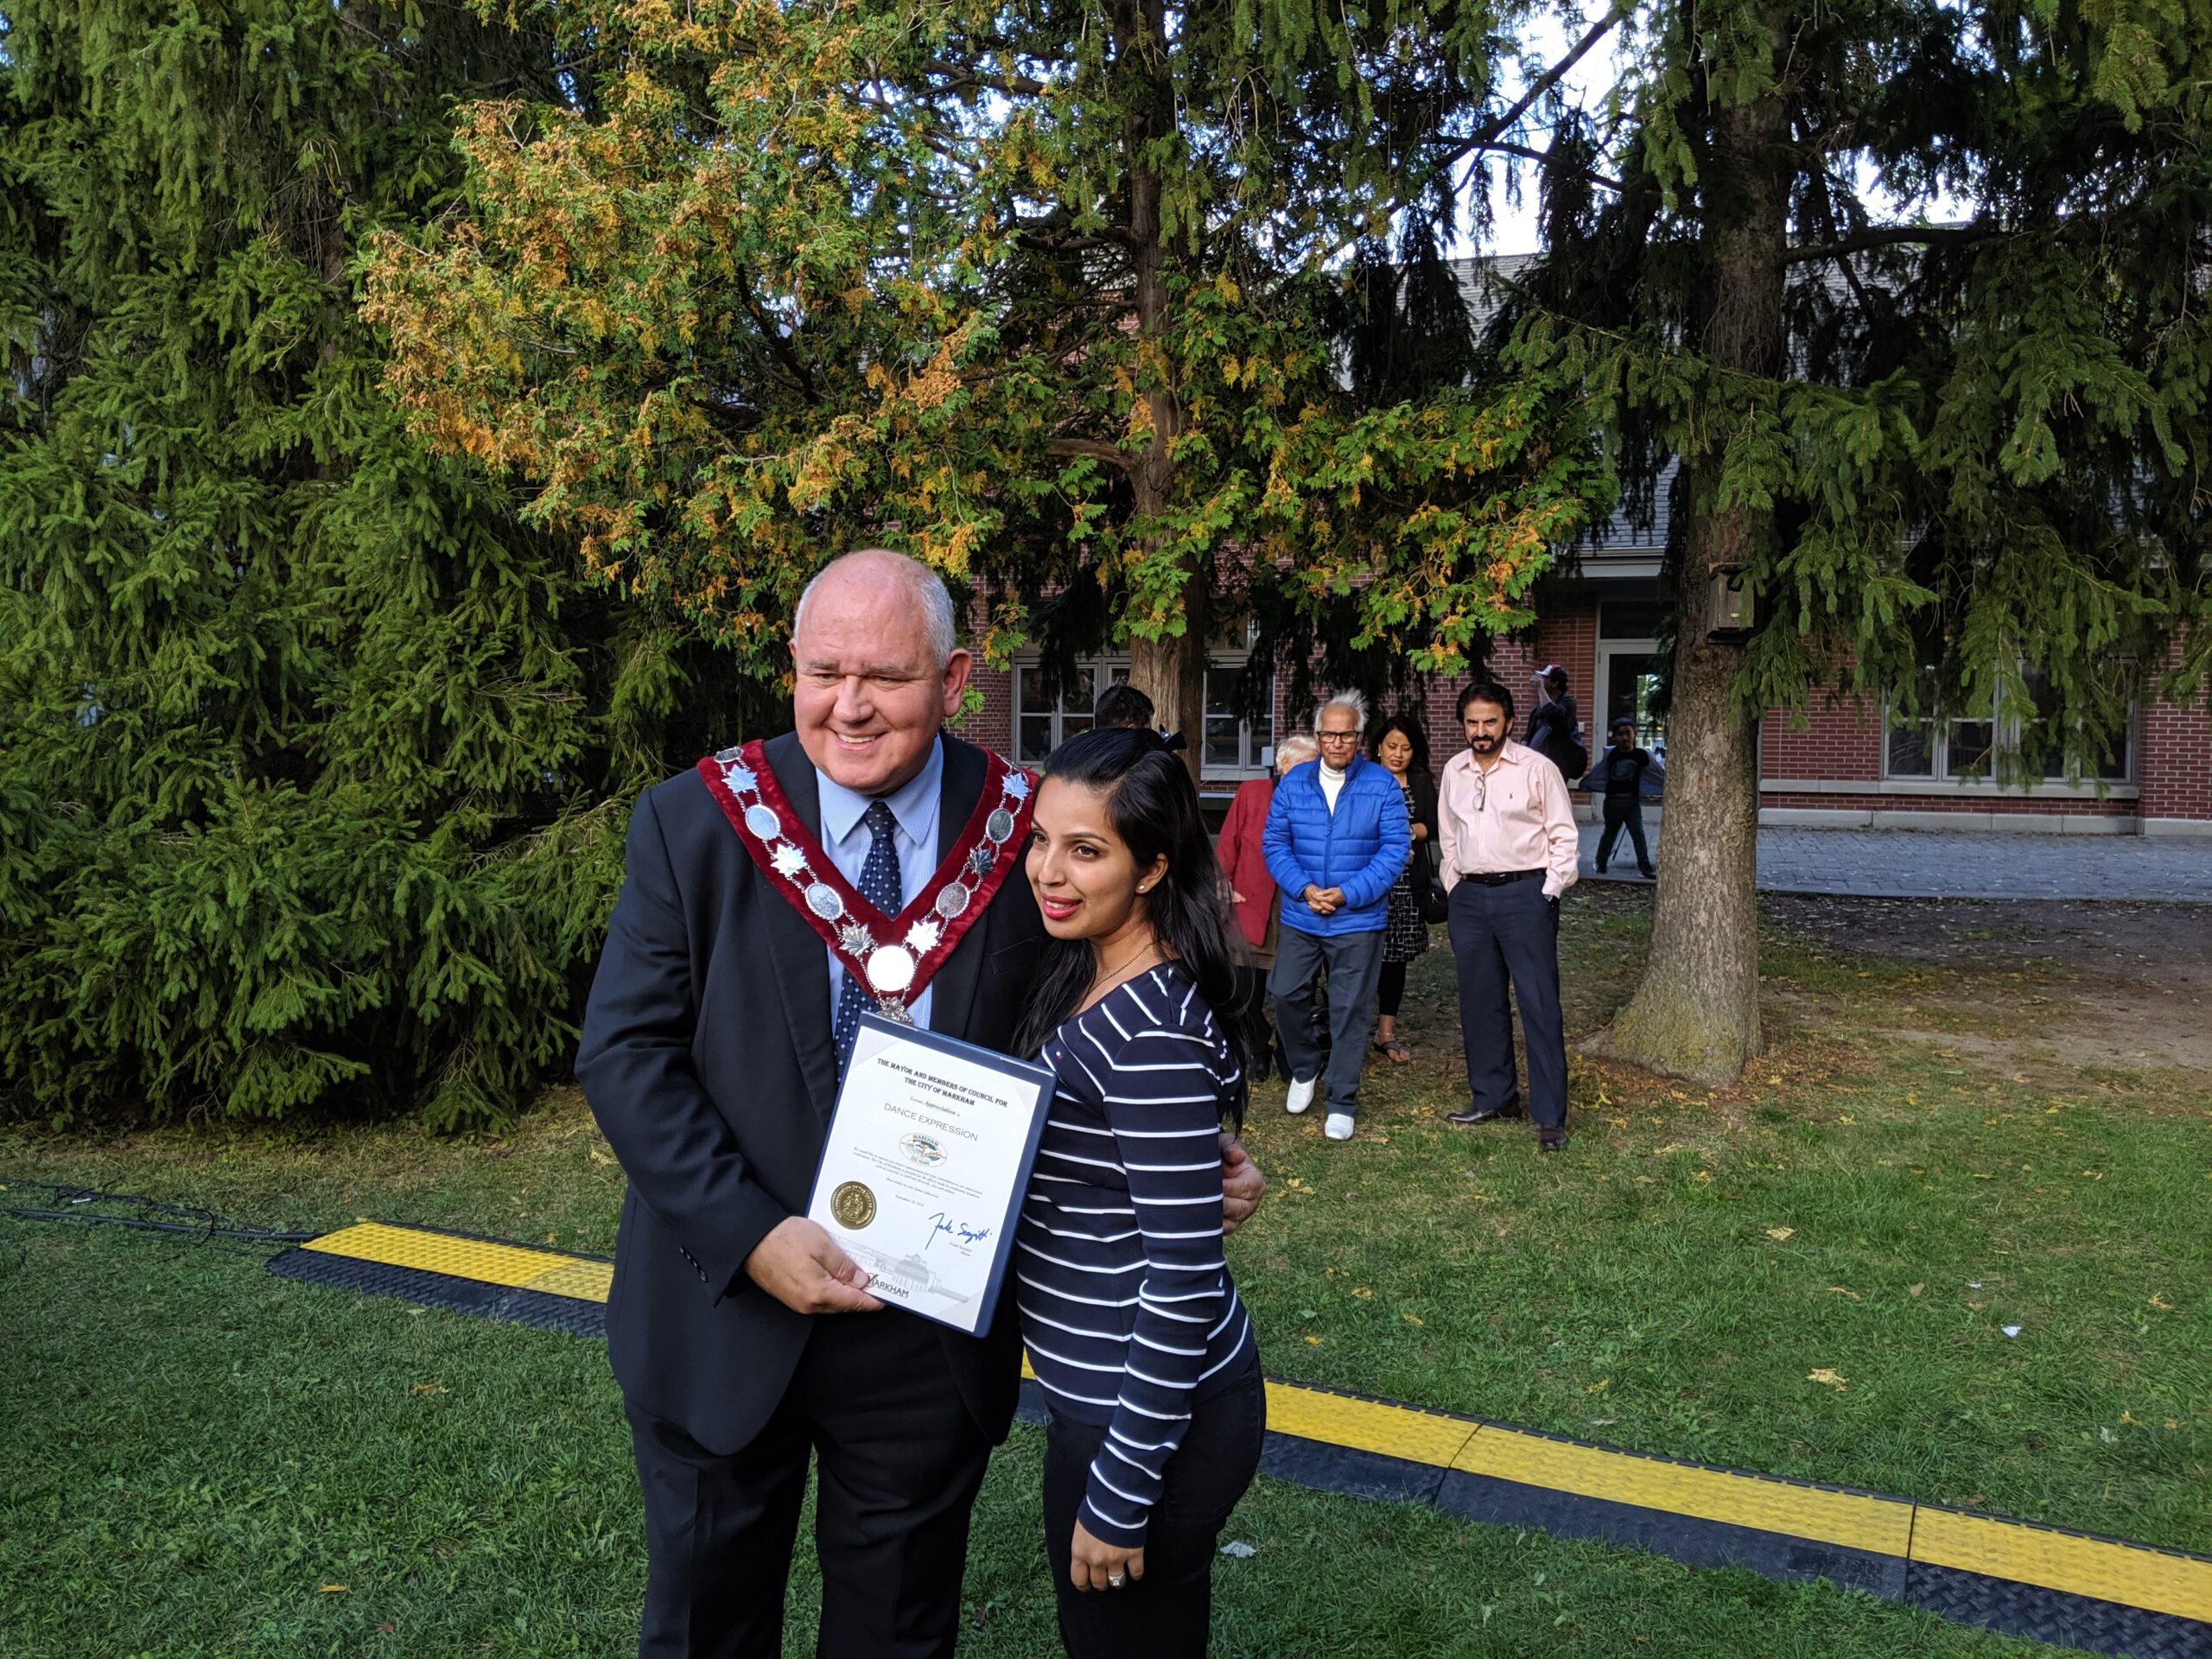 Mayor of Markham, Frank Scarpitti, in ceremonial chain and Creative director and founder of Dance Expression Studio, holding a certificate posing for a photograph outdoors, with observers in the background, at the Markham 225th anniversary.